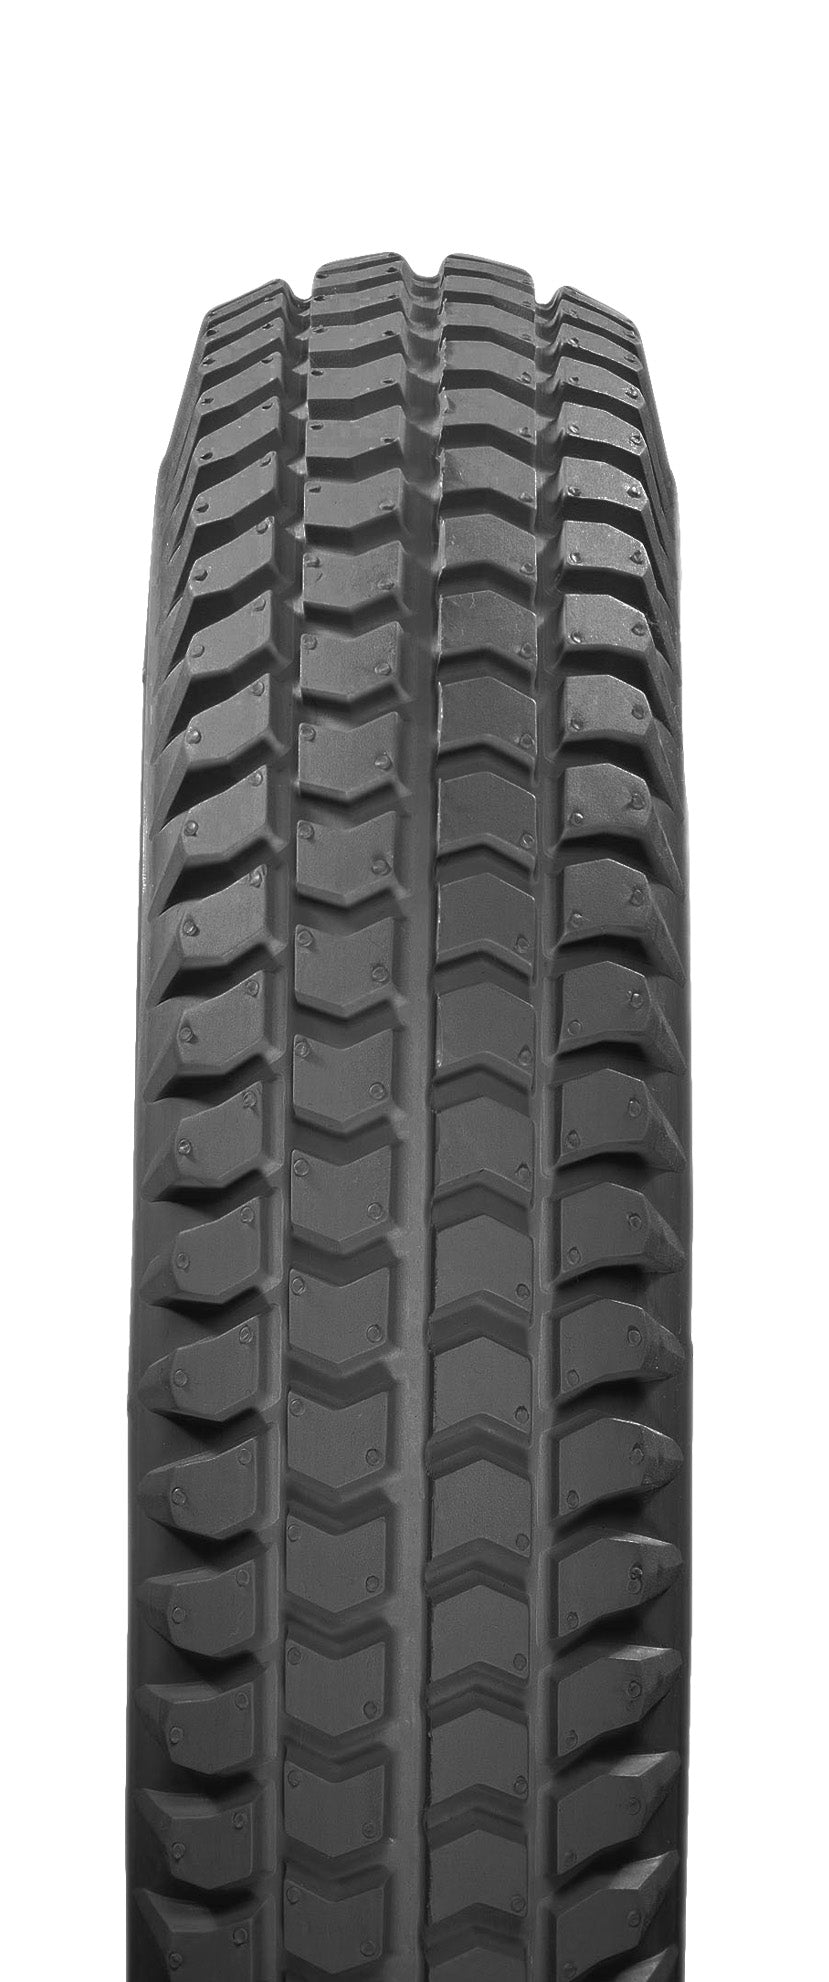 3.00-8" (14x3") Black Non Marking, All Weather, Pneumatic Tire